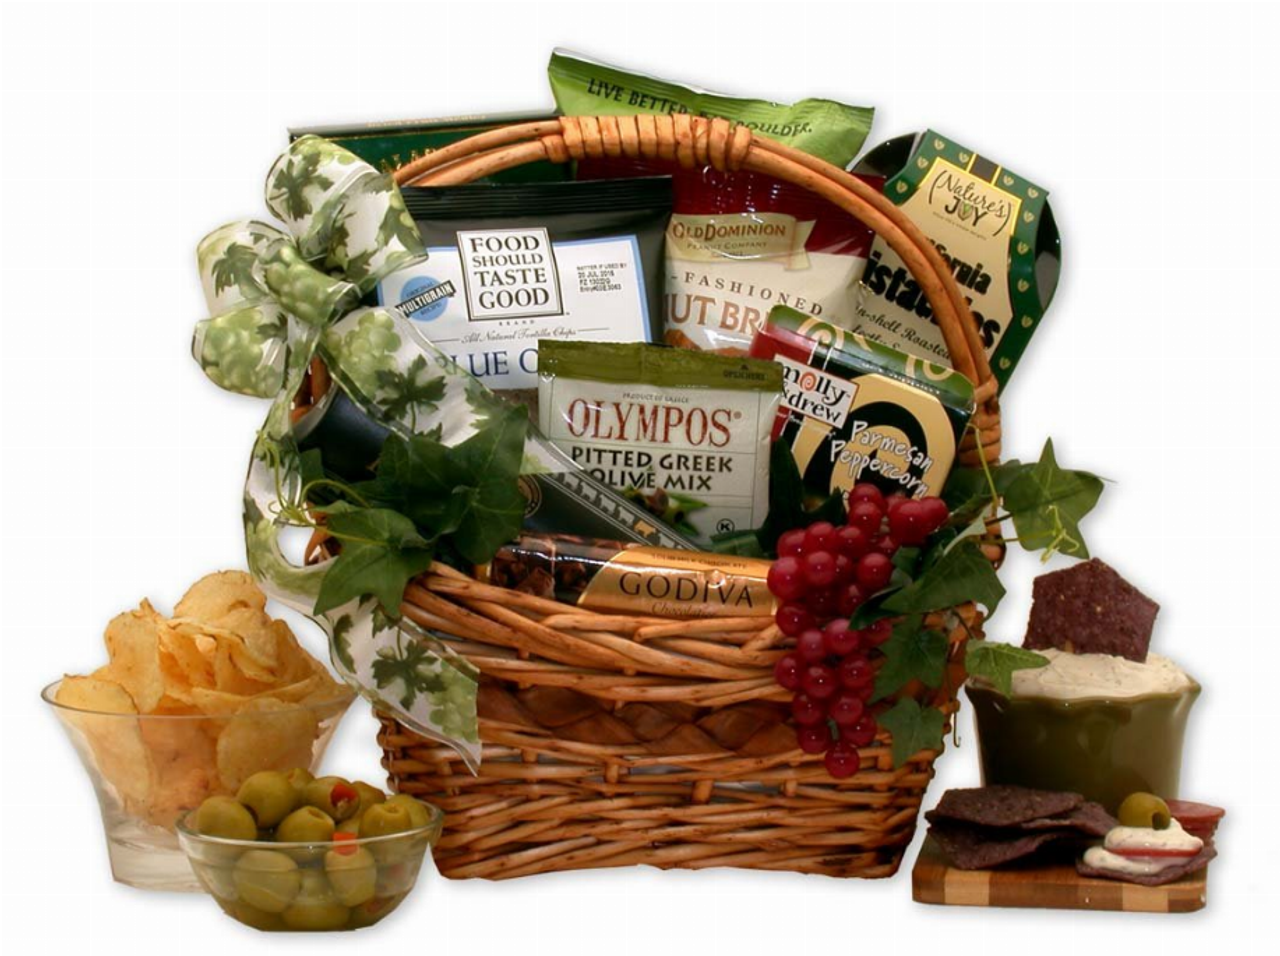 Gluten Free Gourmet Gift Basket - Delicious Assortment of Gluten Free Treats for Any Occasion